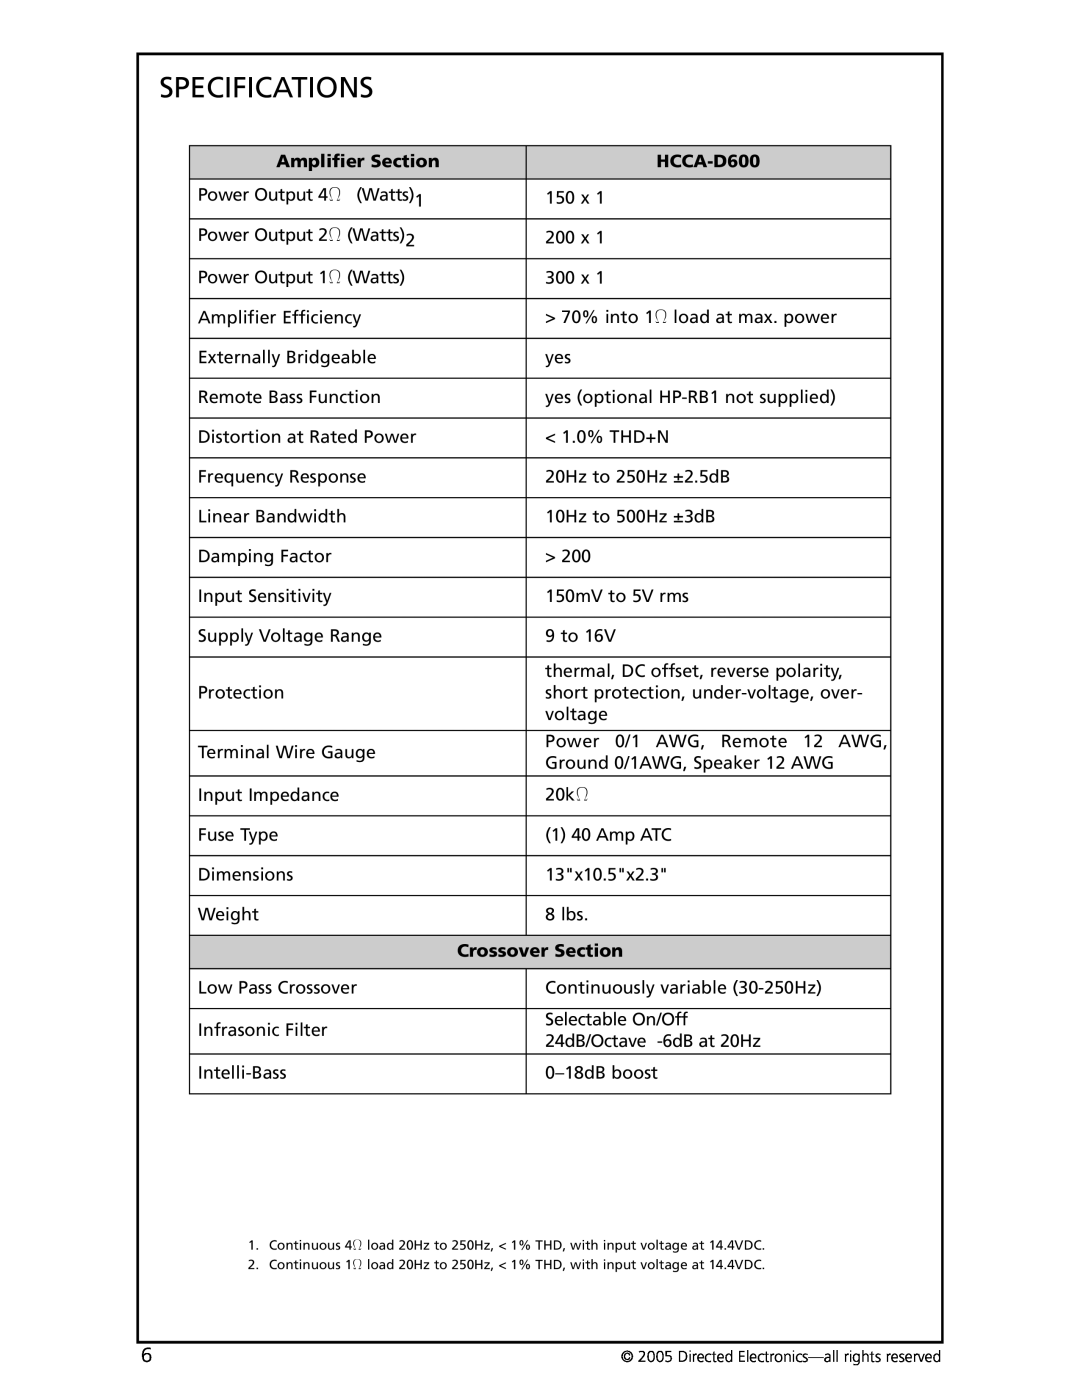 Orion Car Audio HCCA-D600 manual Specifications, Amplifier Section, Crossover Section 